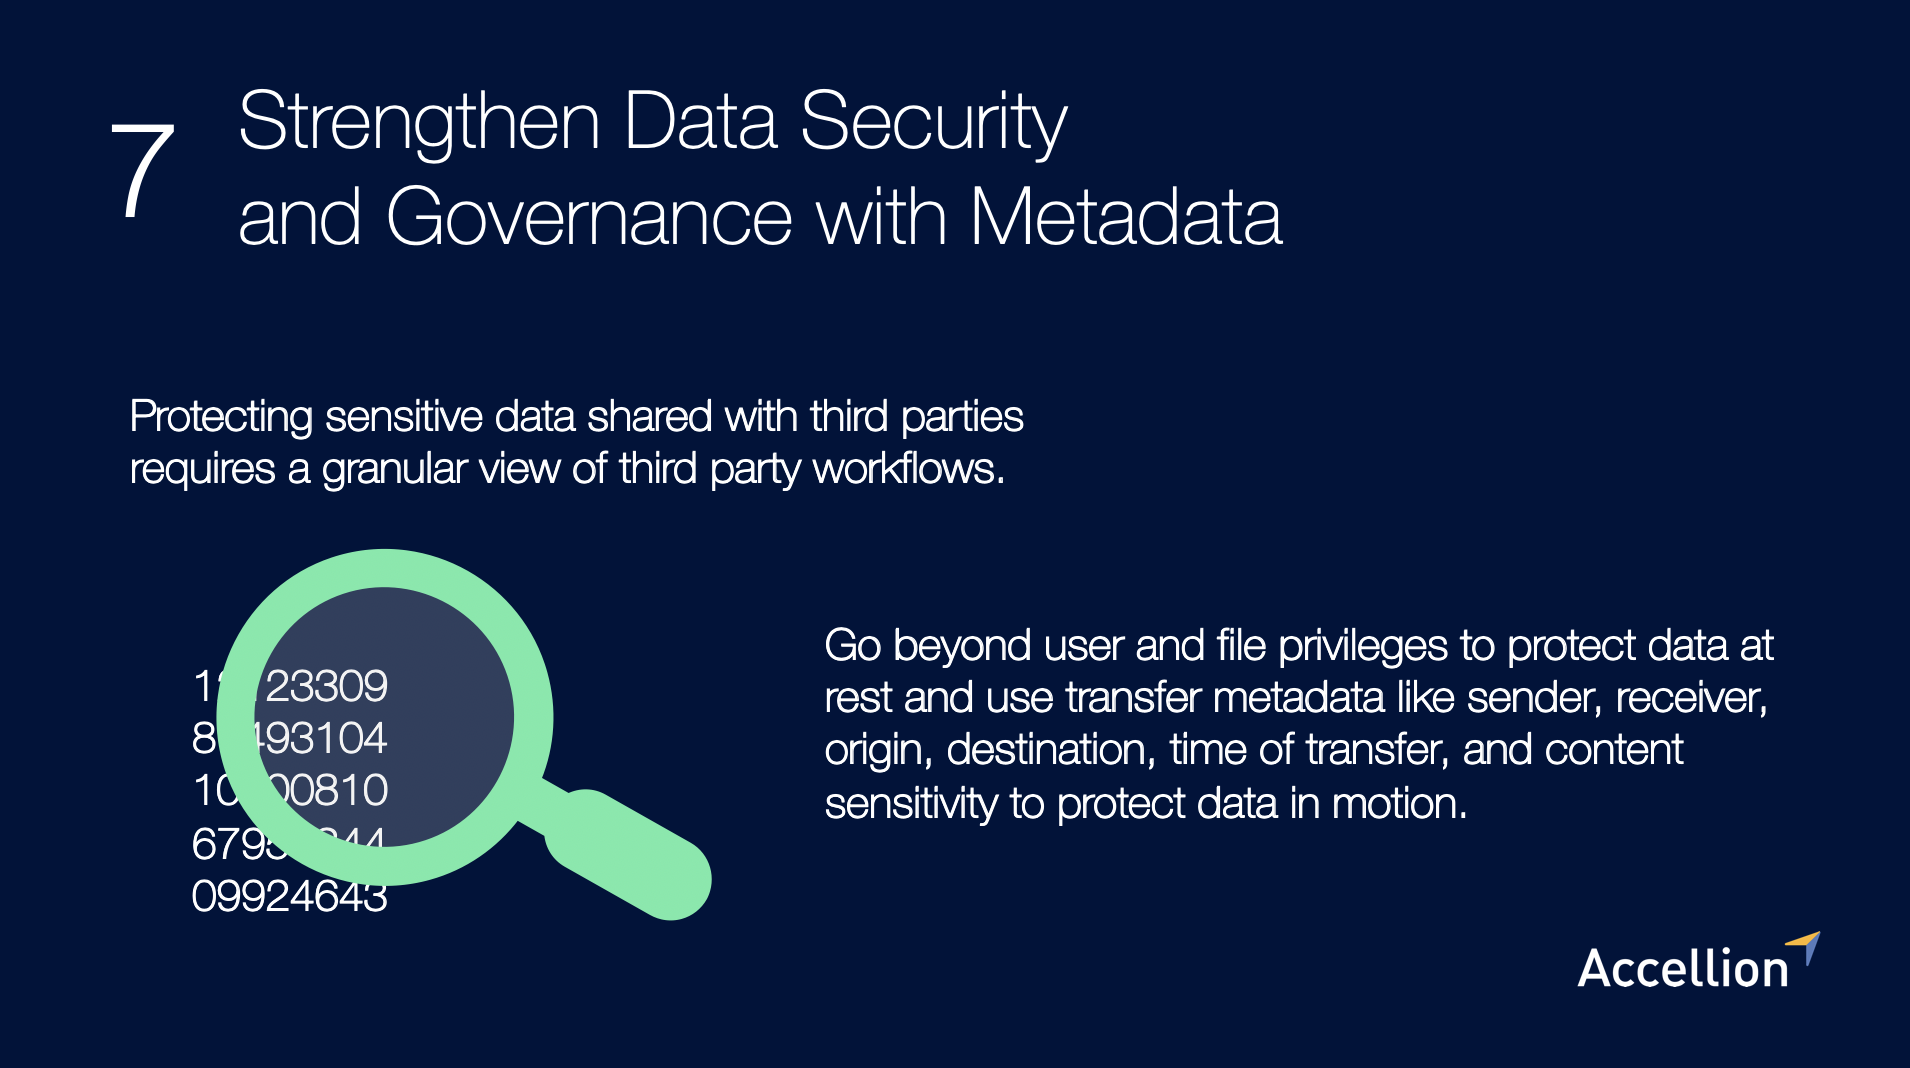 Strengthen data security and governance with metadata